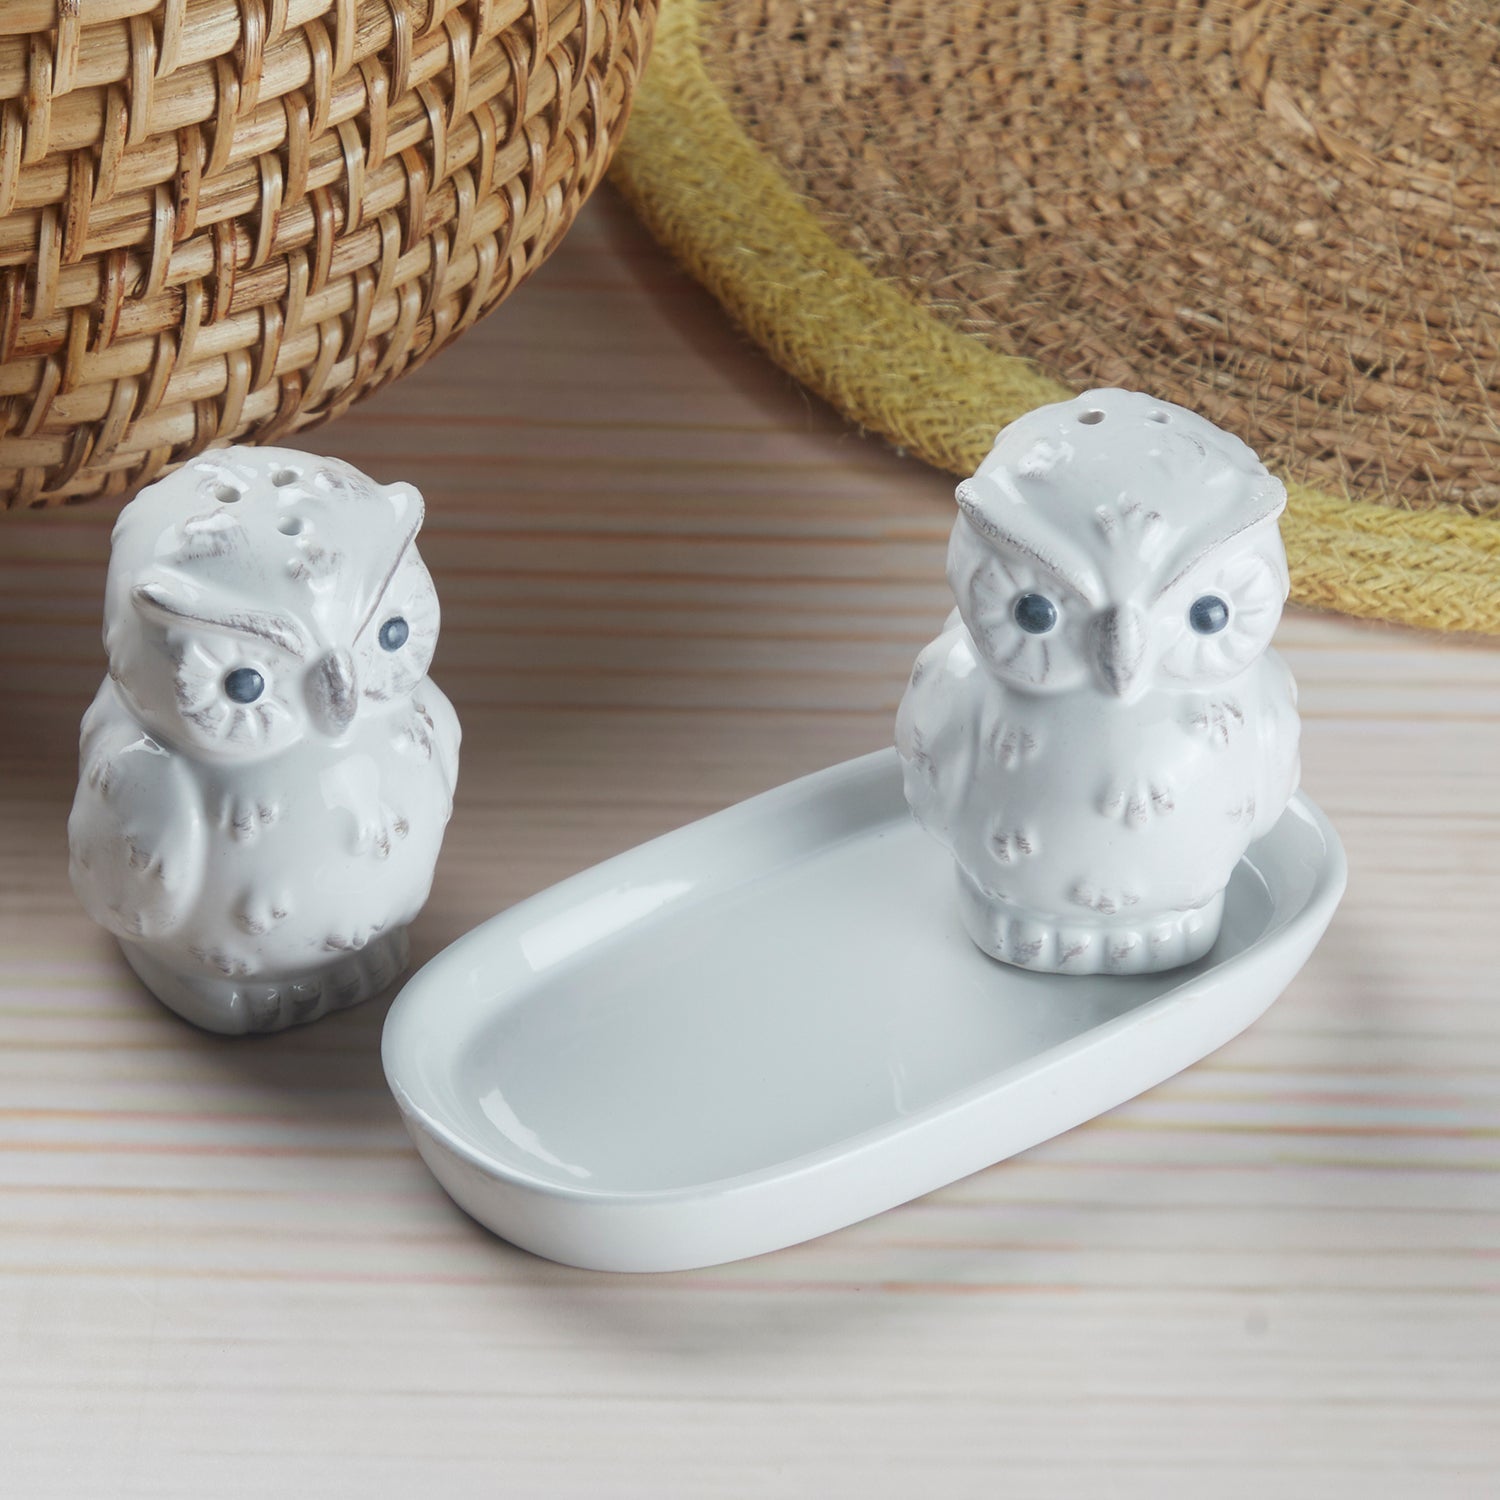 Ceramic Salt and Pepper Set with tray, Owl Design, Pink